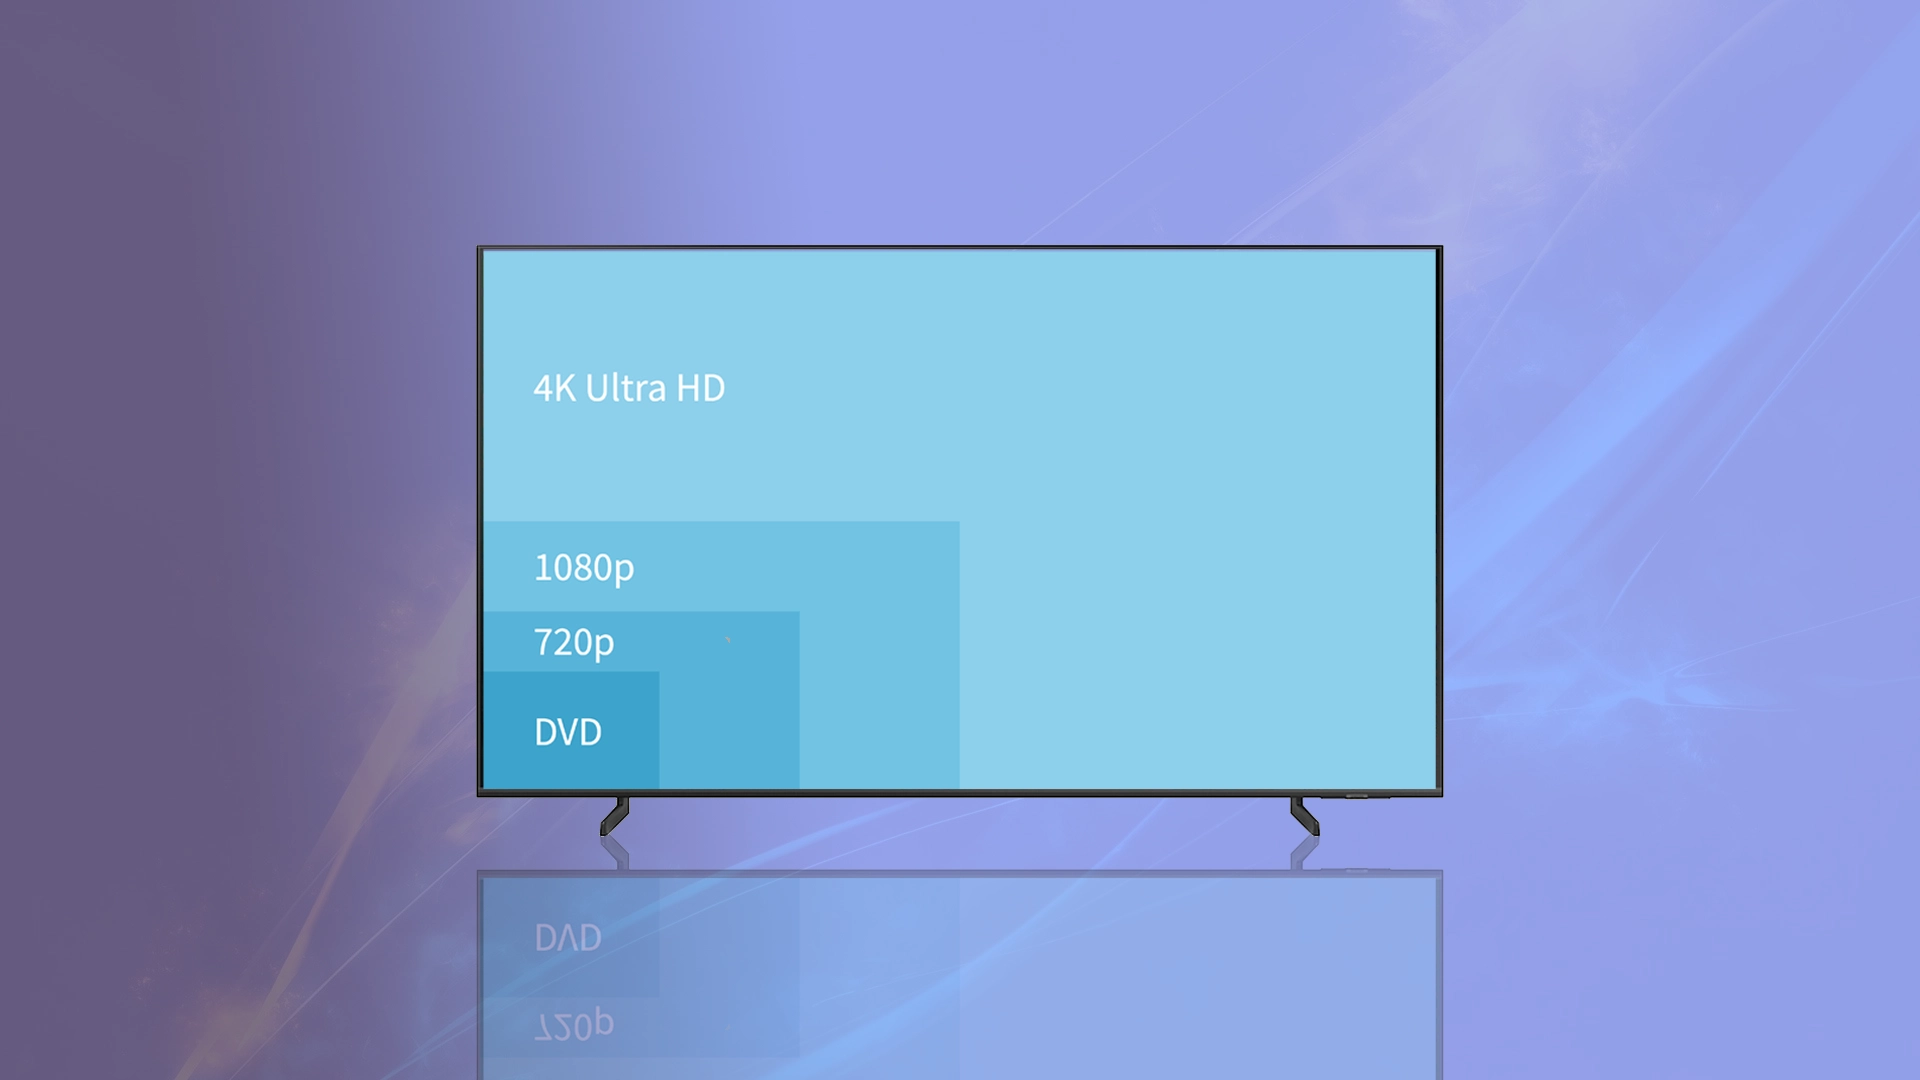 How to change resolution on Samsung TV